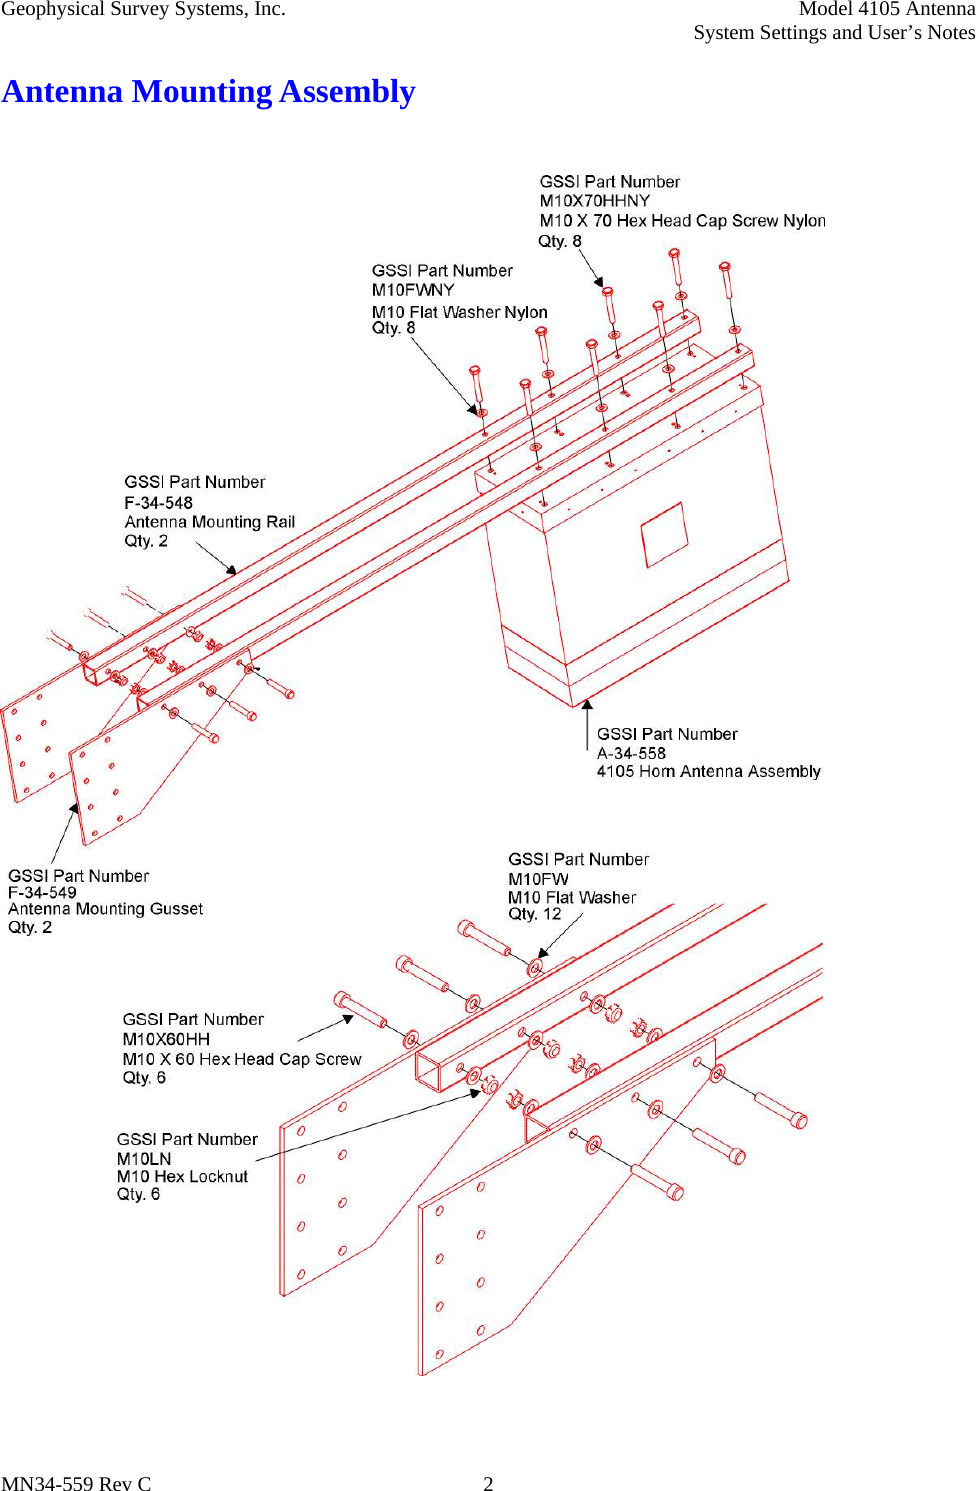 Geophysical Survey Systems, Inc.  Model 4105 Antenna  System Settings and User’s Notes MN34-559 Rev C    2Antenna Mounting Assembly  